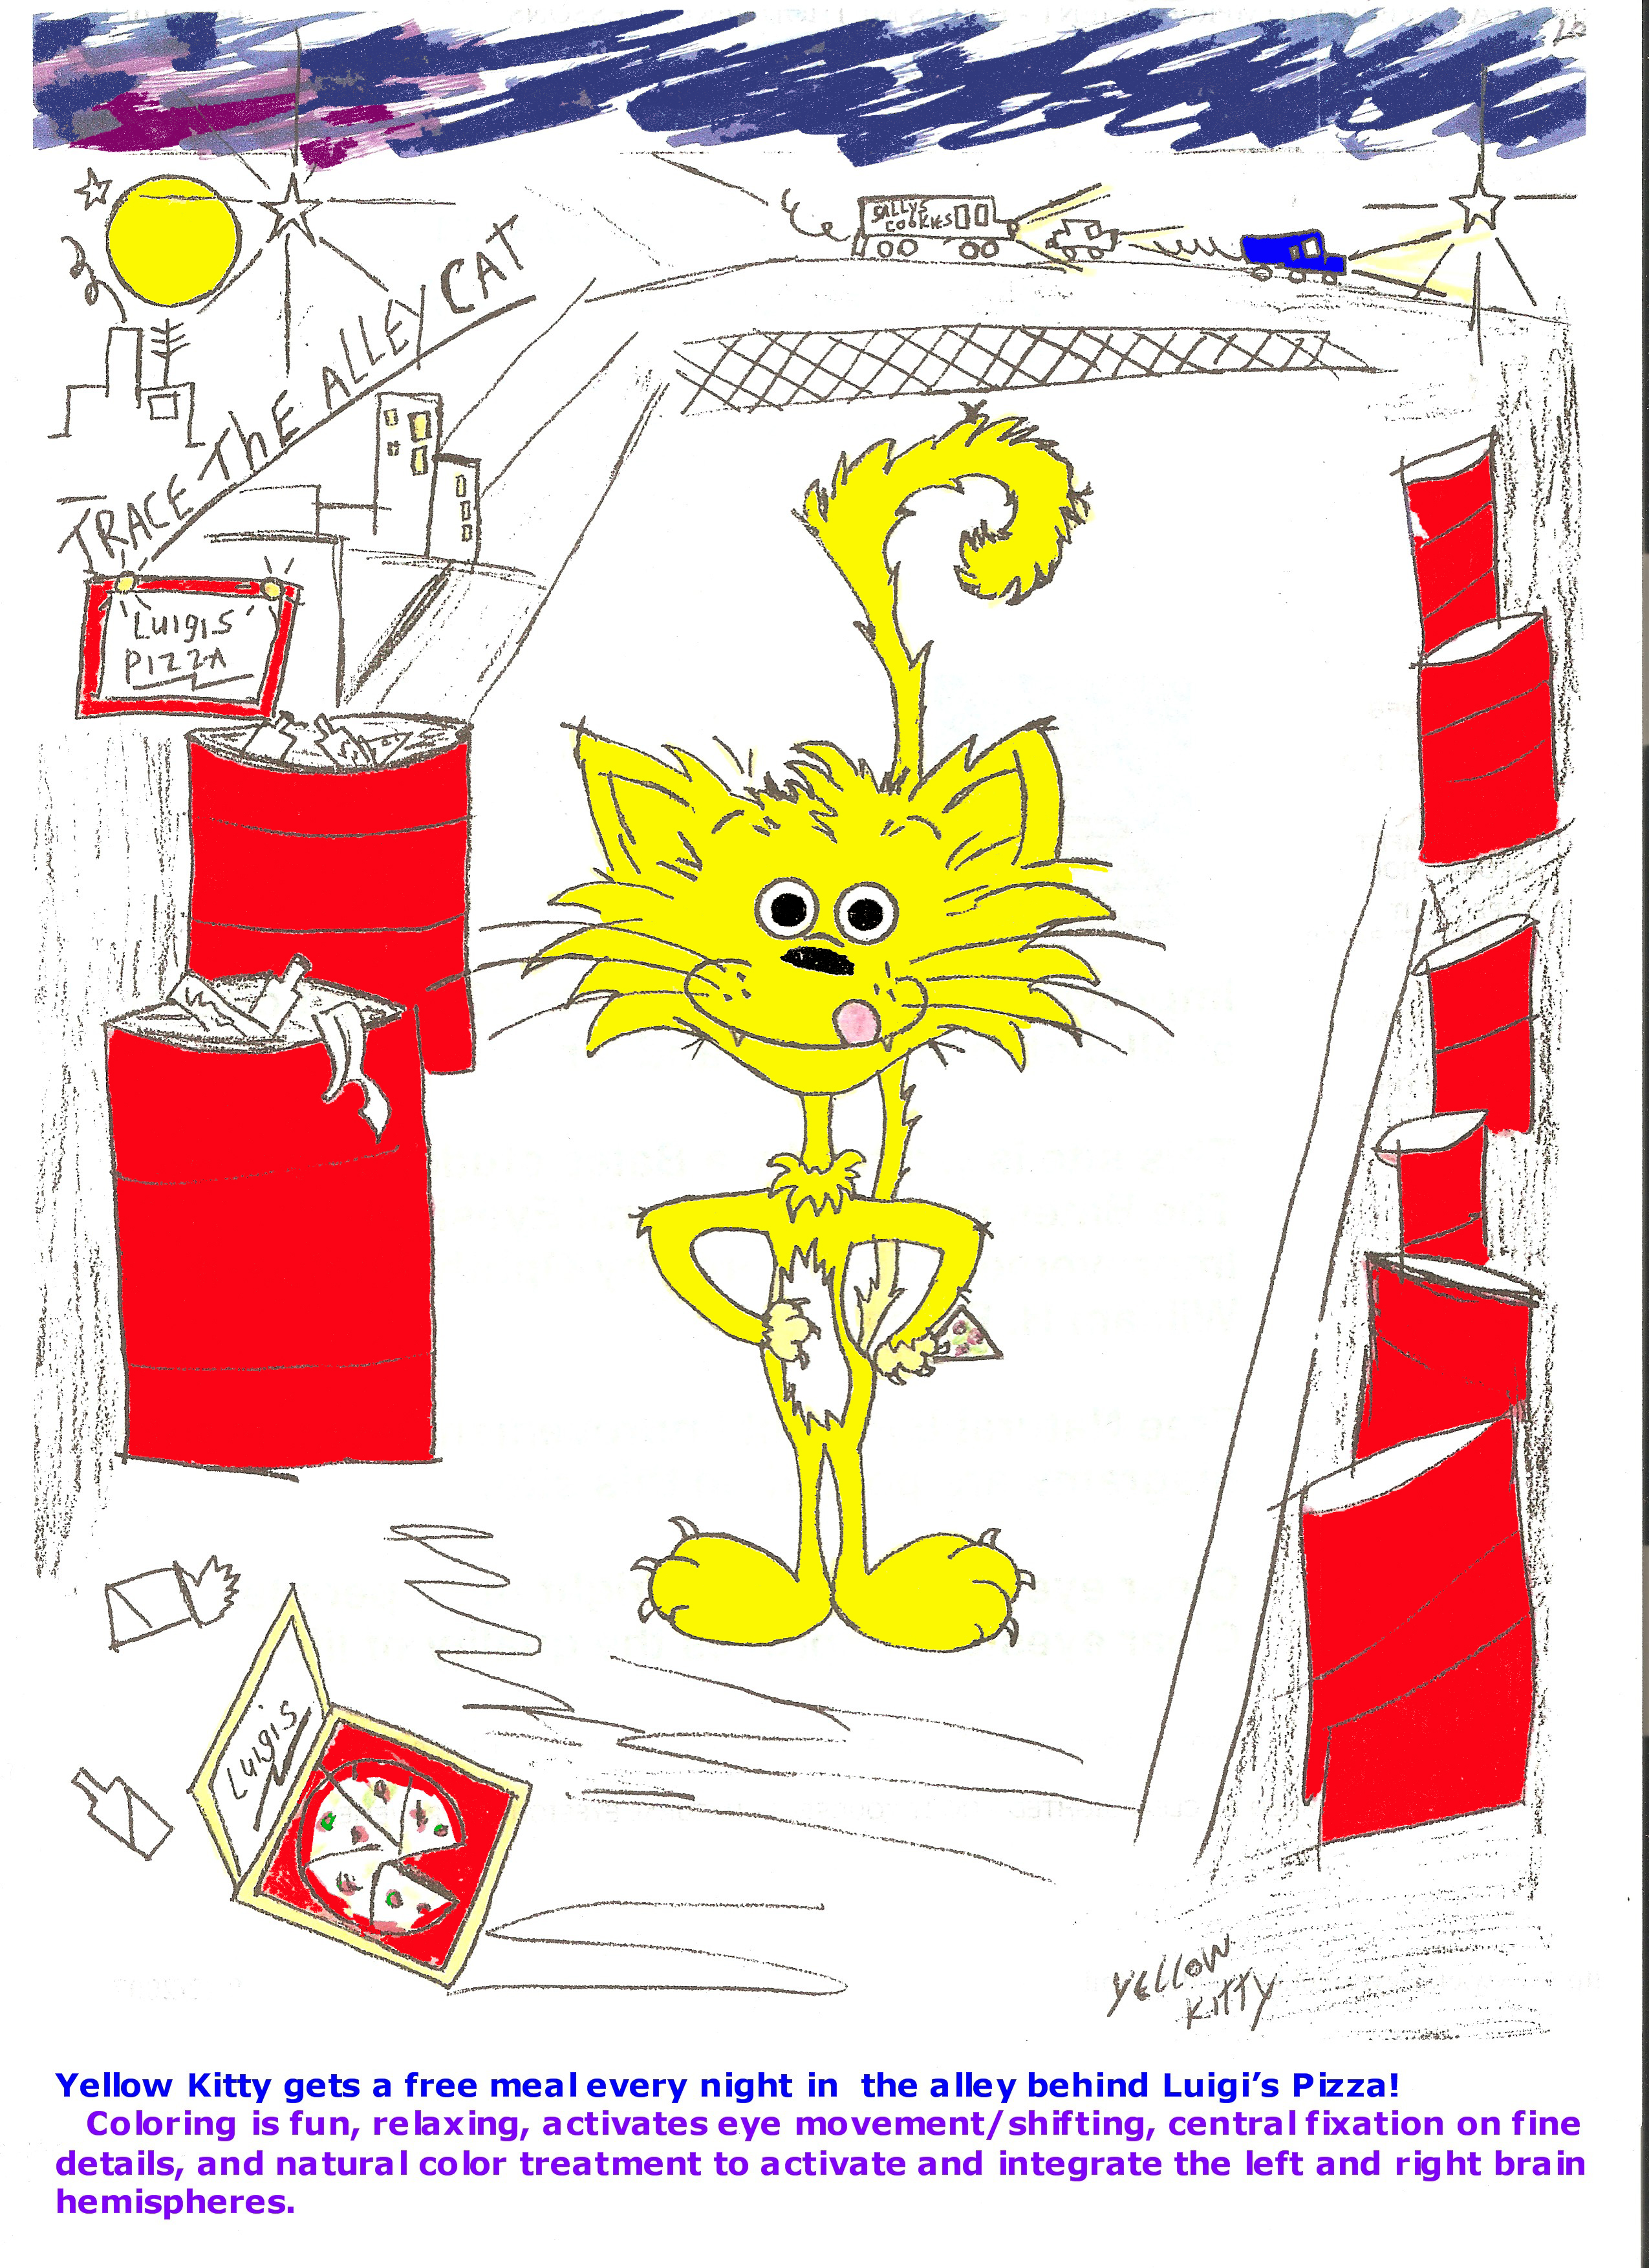 Coloring Book, Yellow Kitty